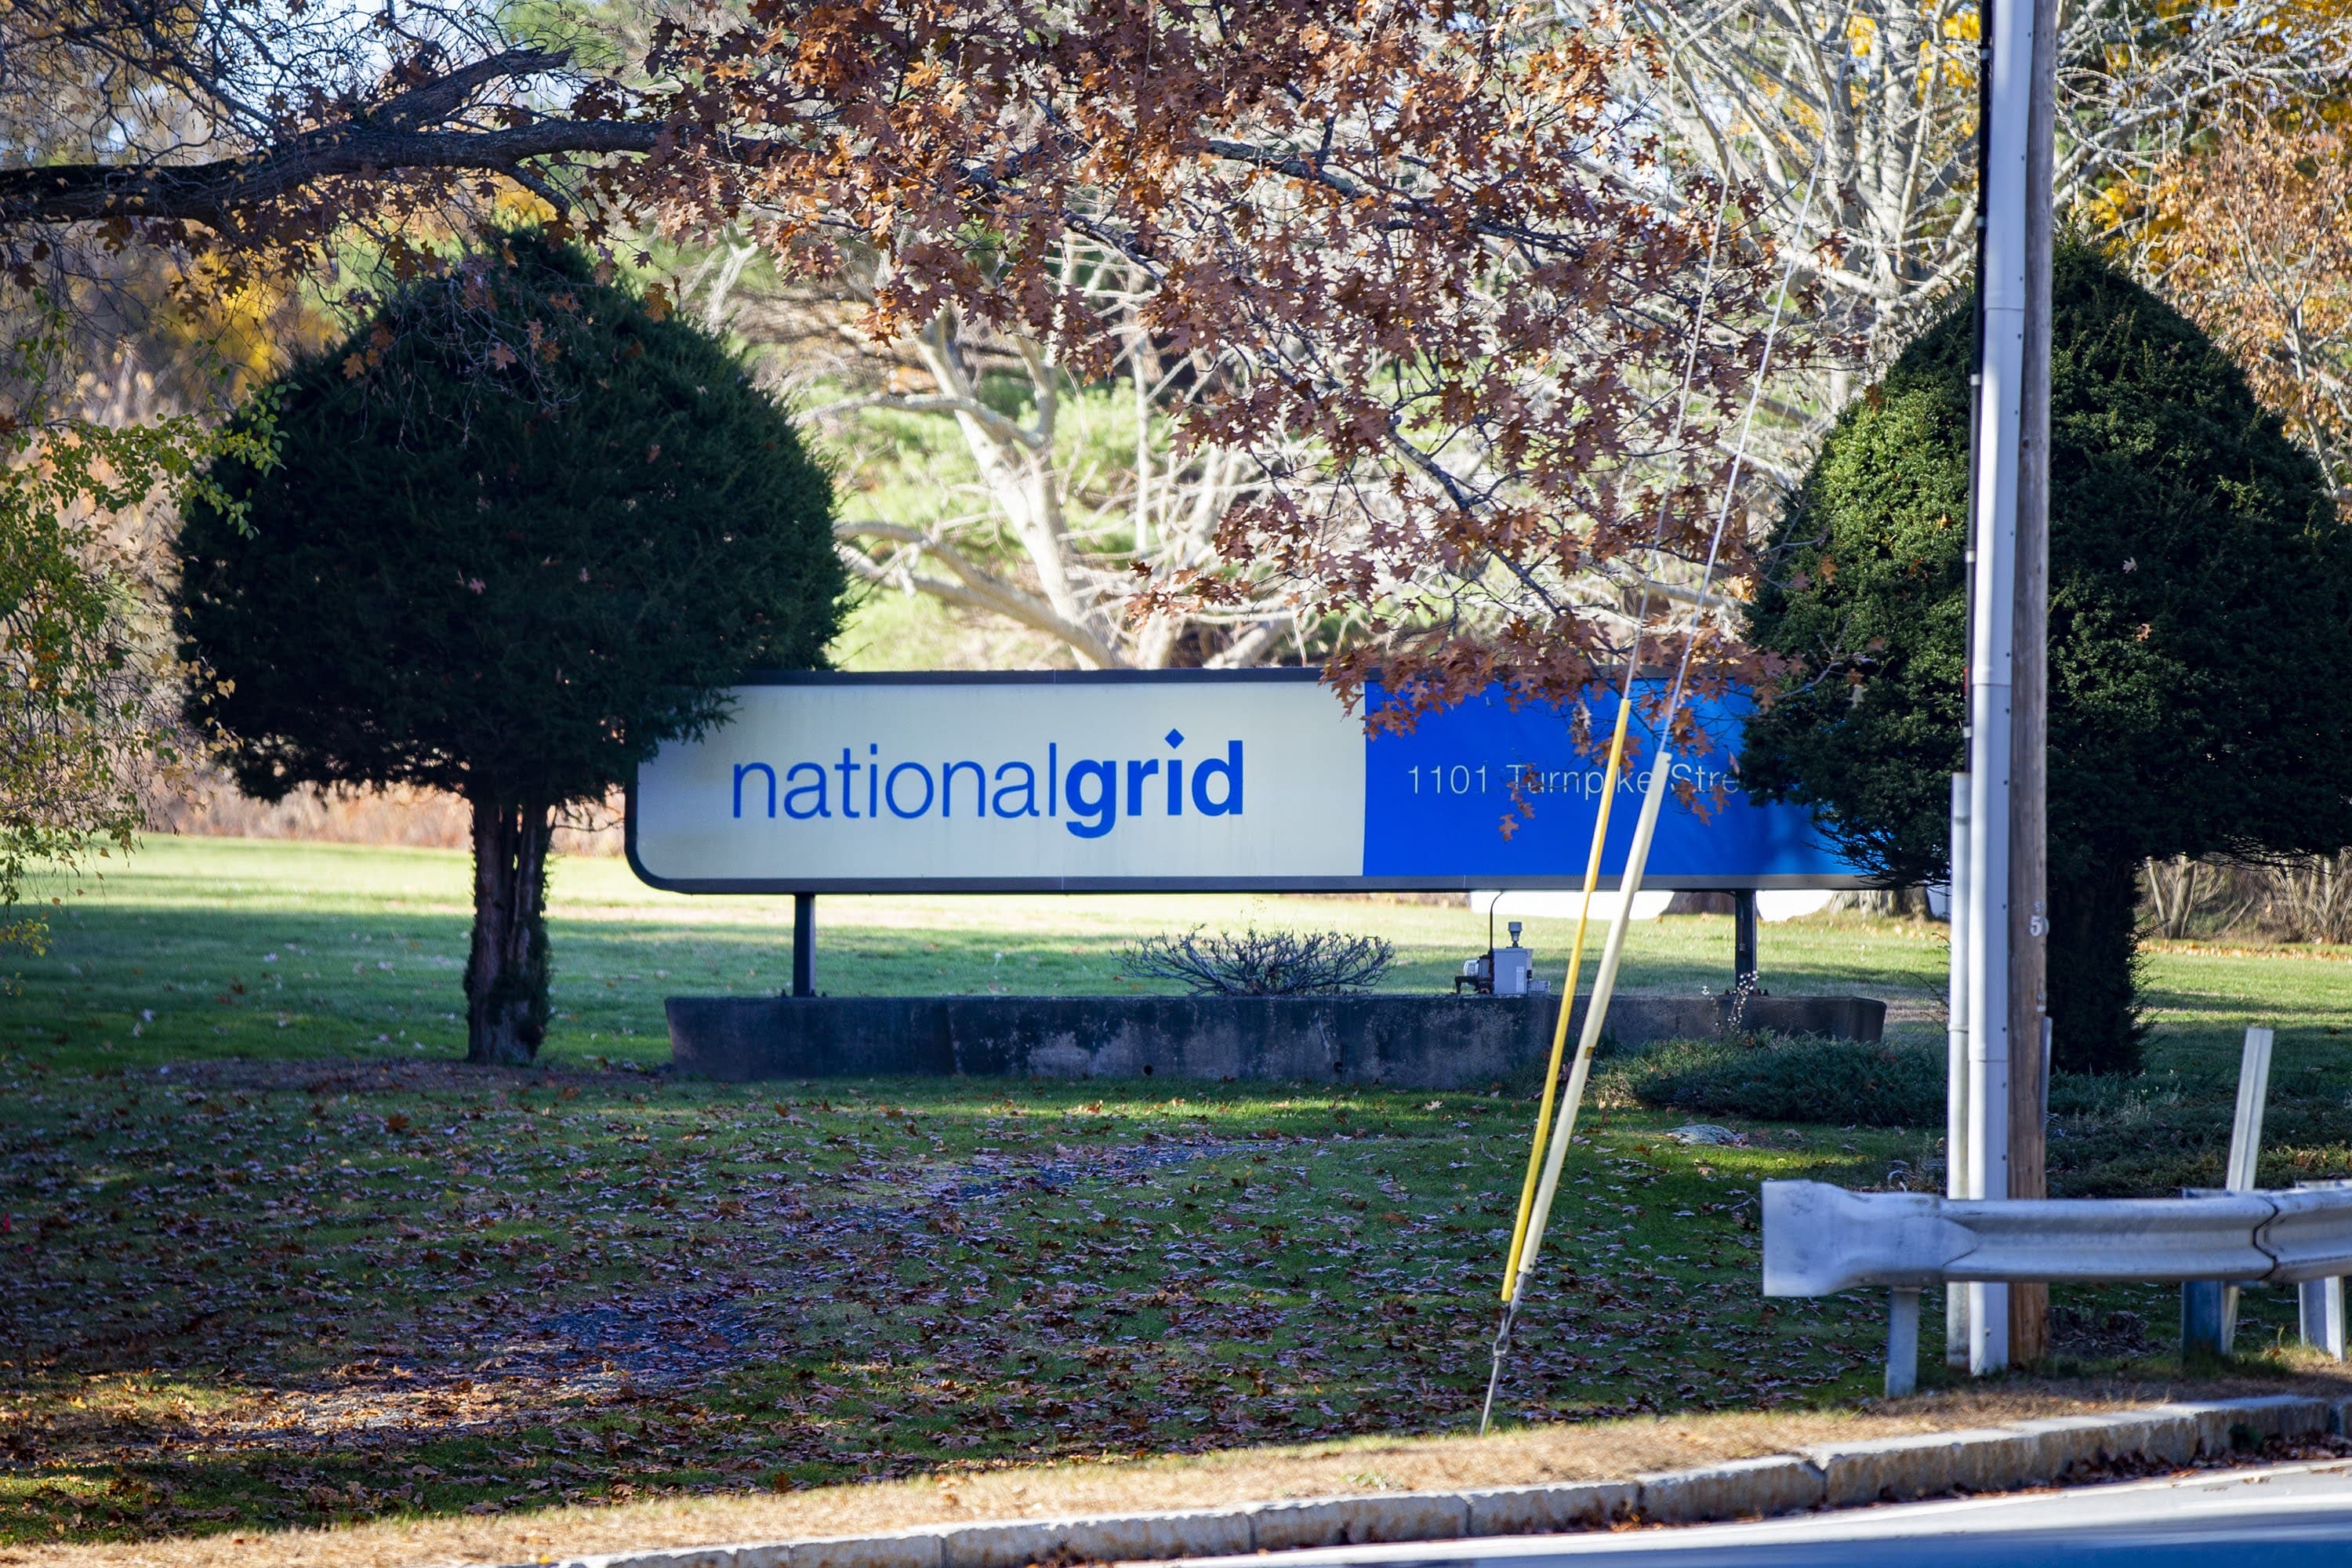 national grid employee email login